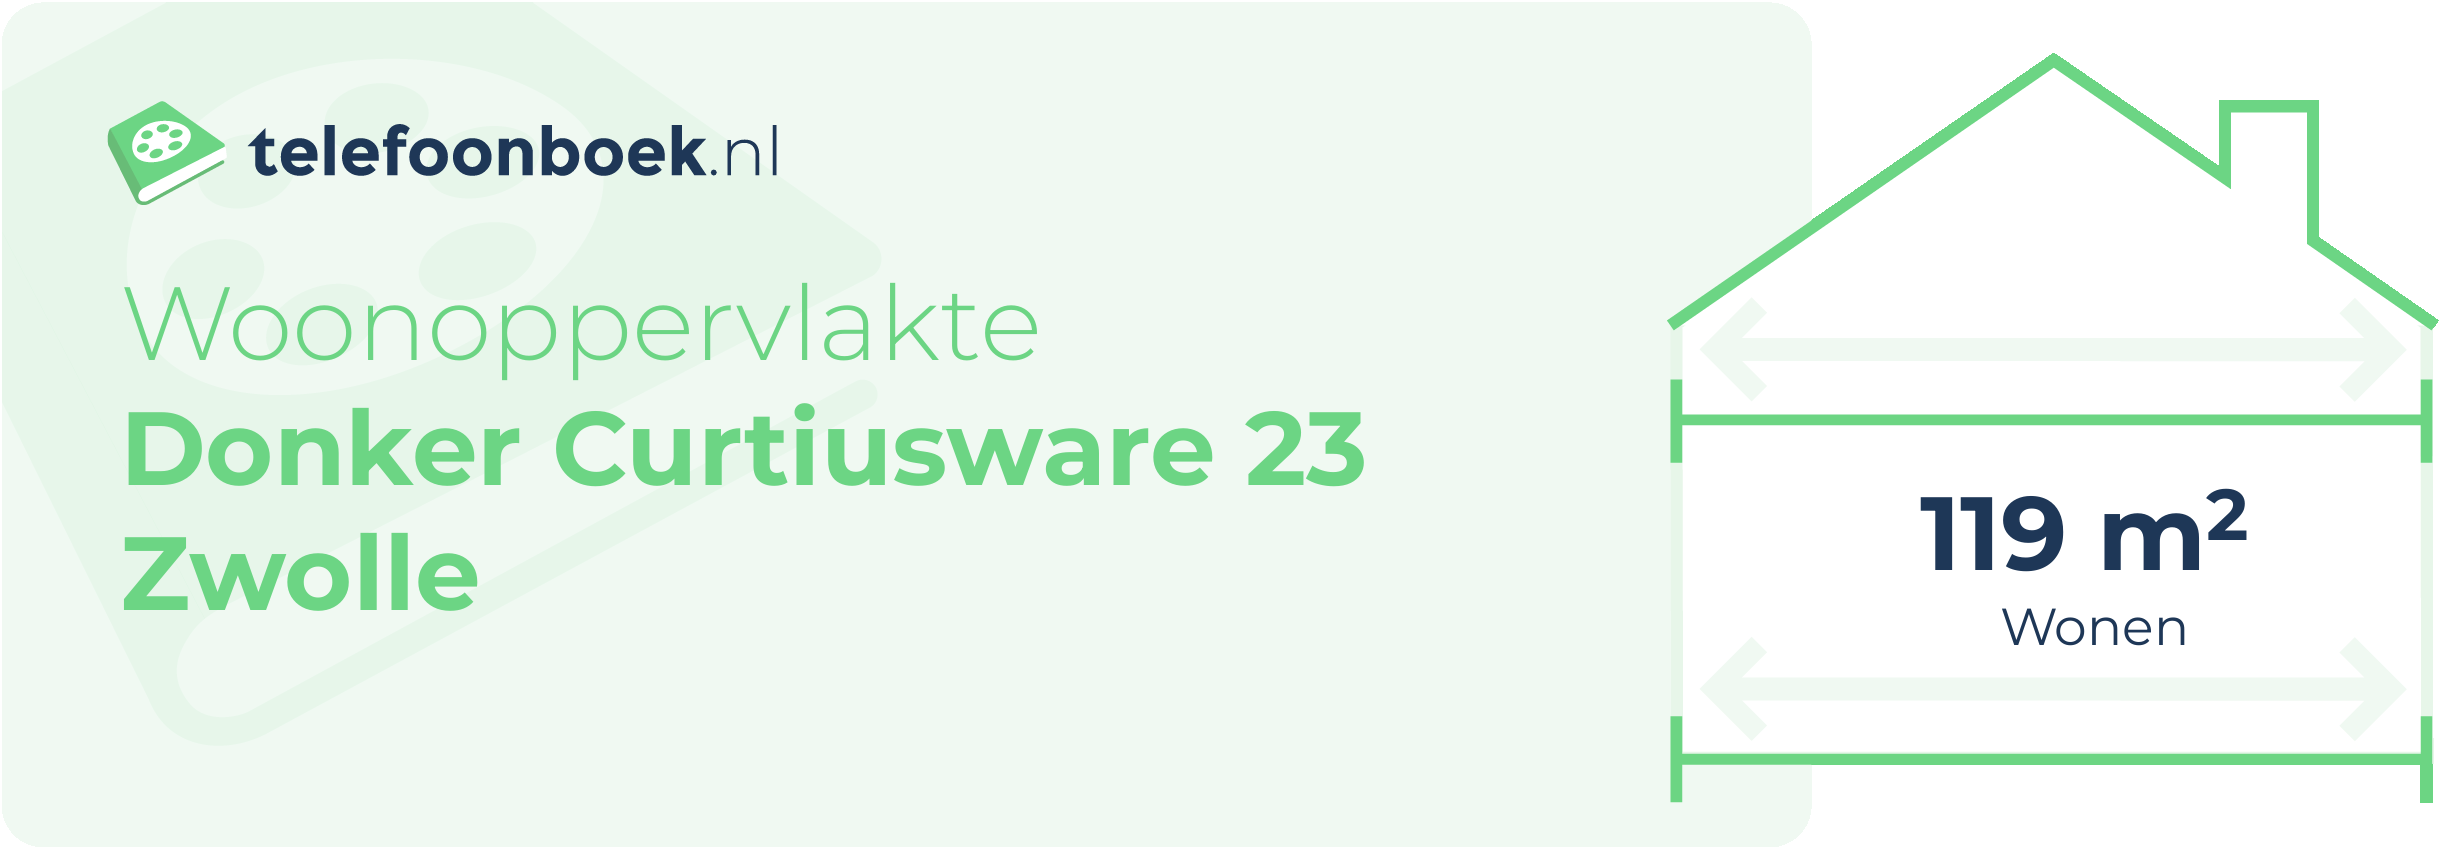 Woonoppervlakte Donker Curtiusware 23 Zwolle